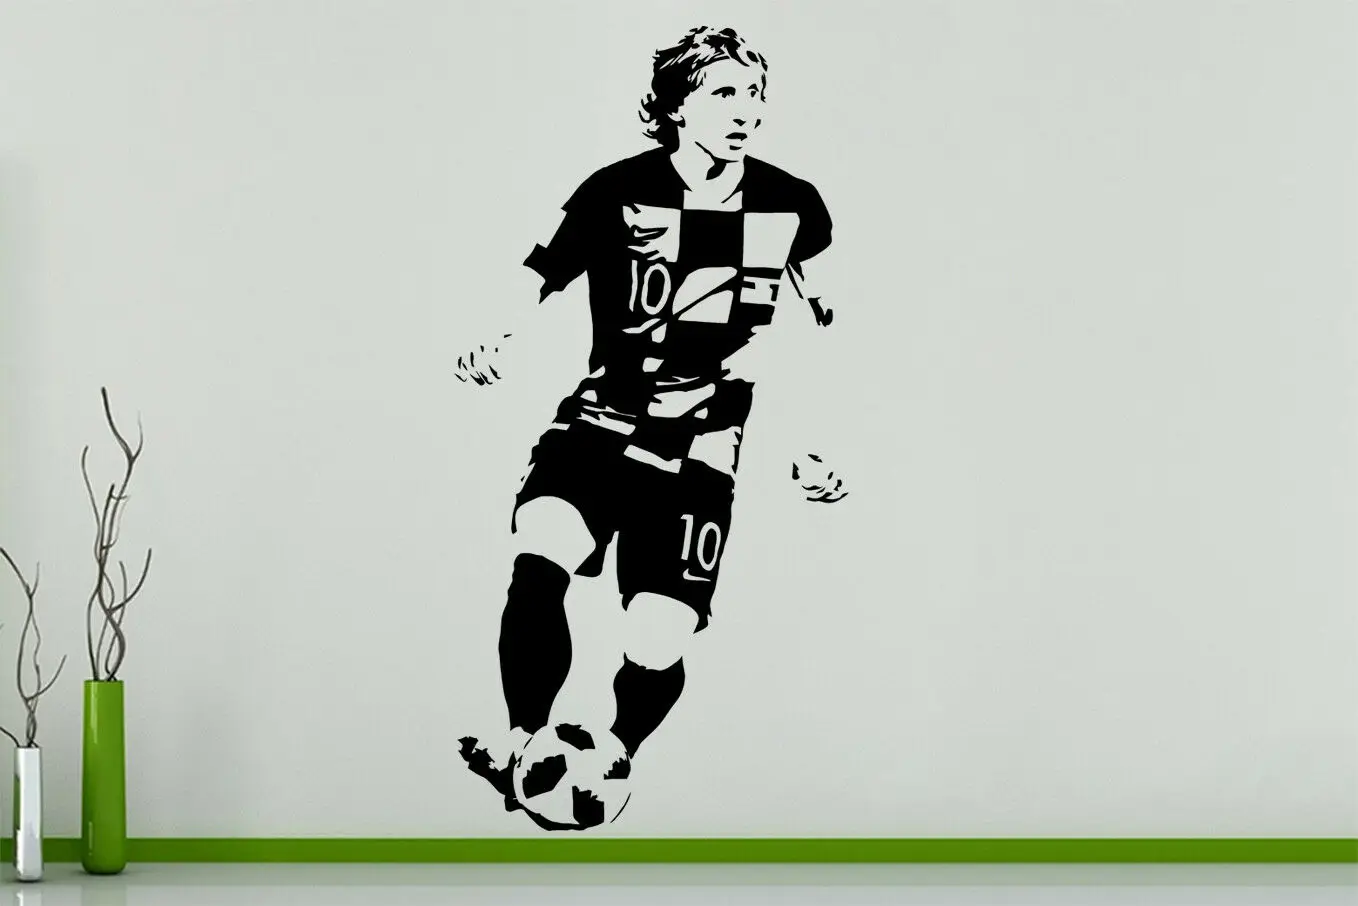 

Diego Costa Luka Modric Gareth Bale Footballer Soccer Player Bedroom Decal Wall Sticker Picture Poster